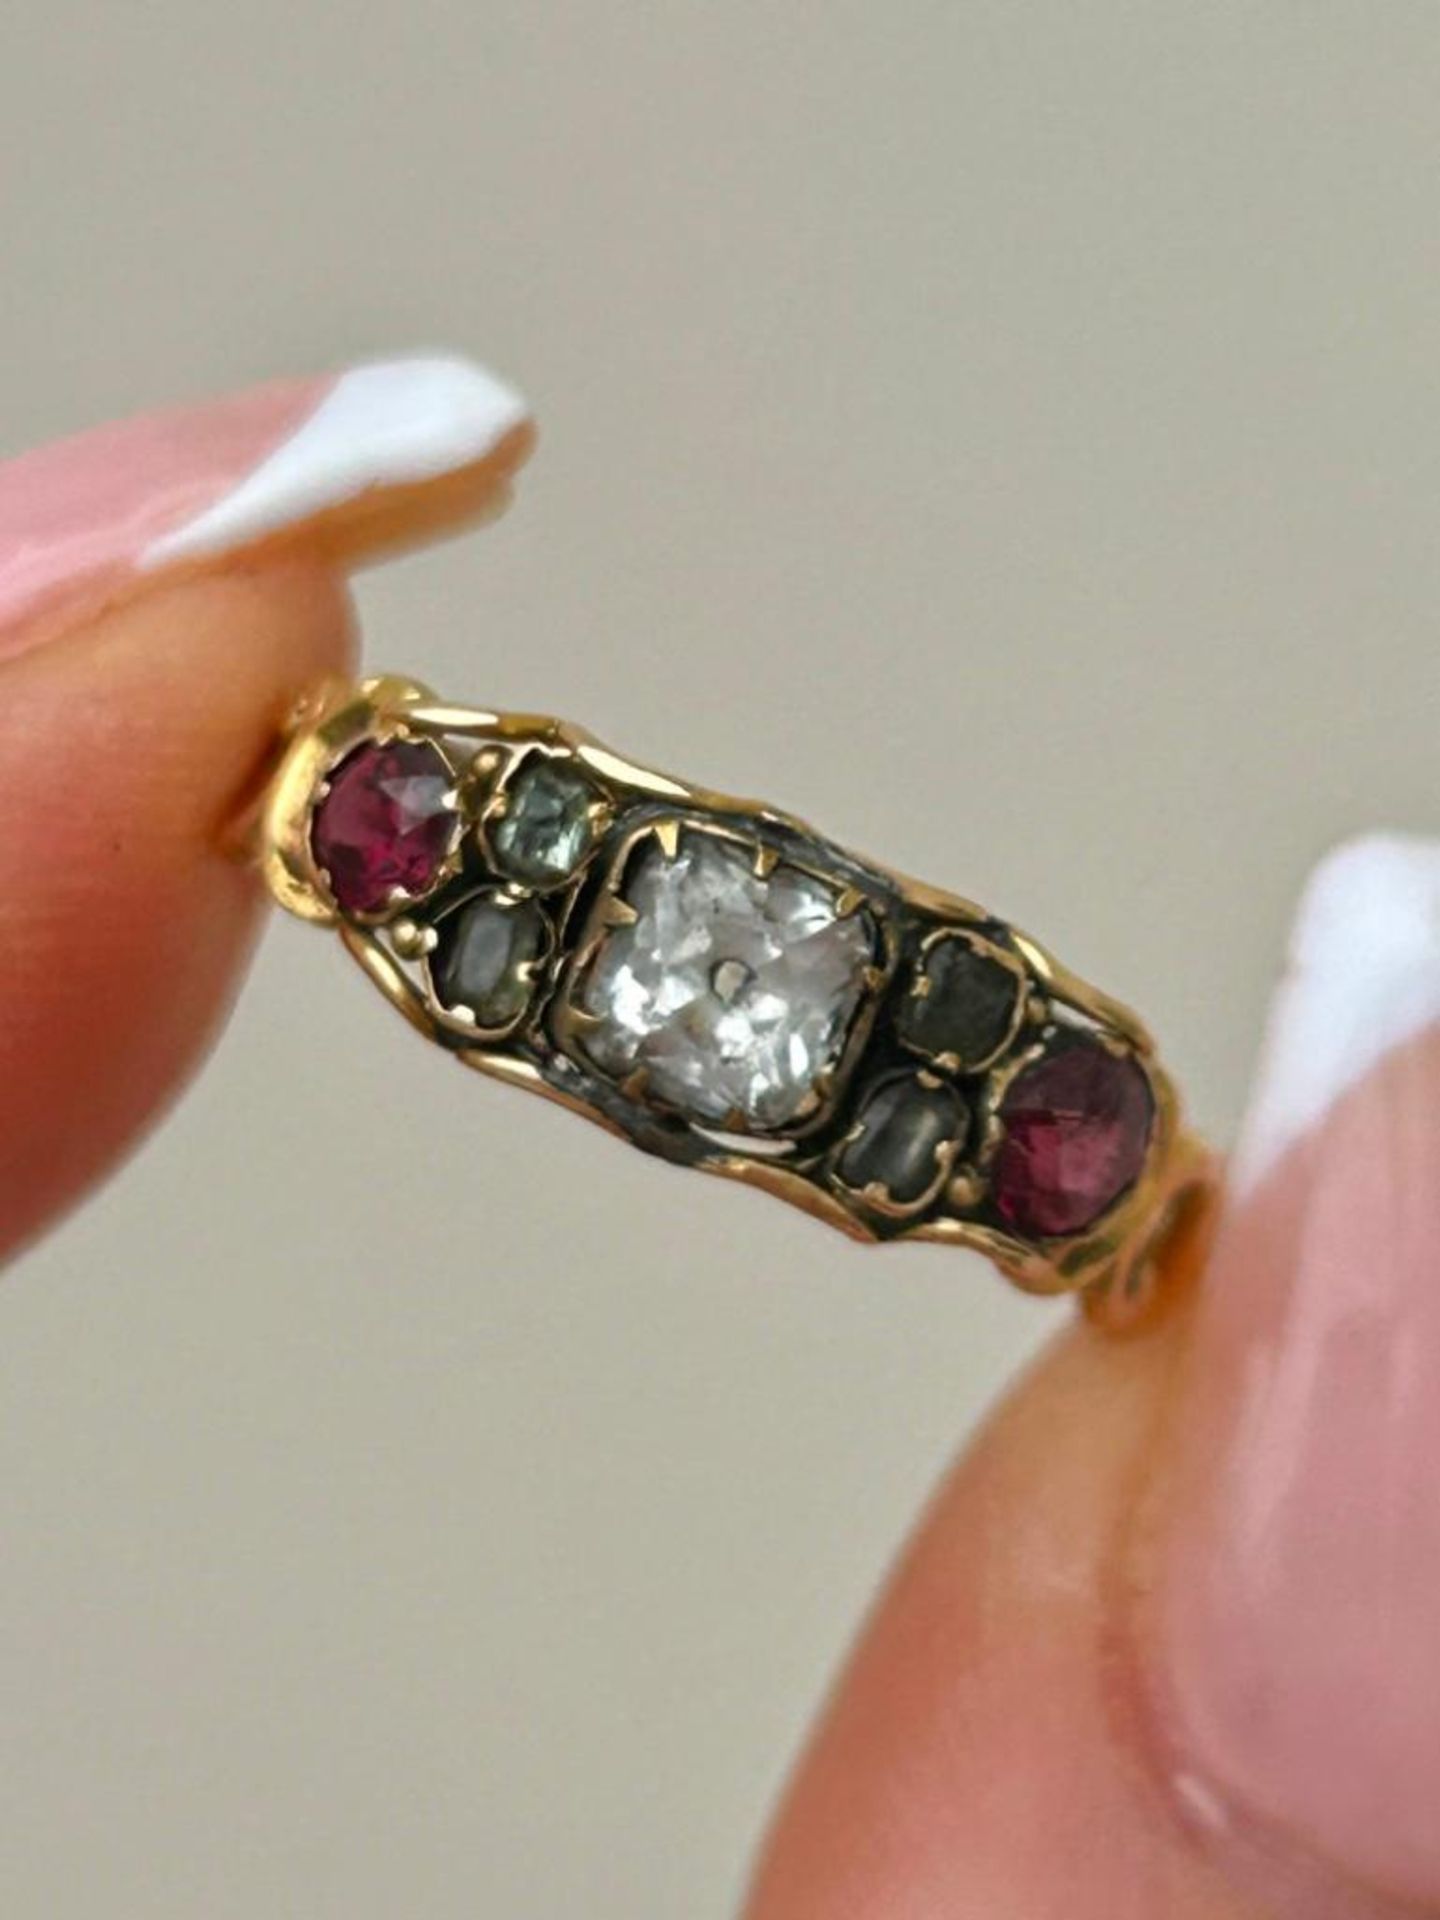 Antique Gemstone Ring in Gold - Image 2 of 7